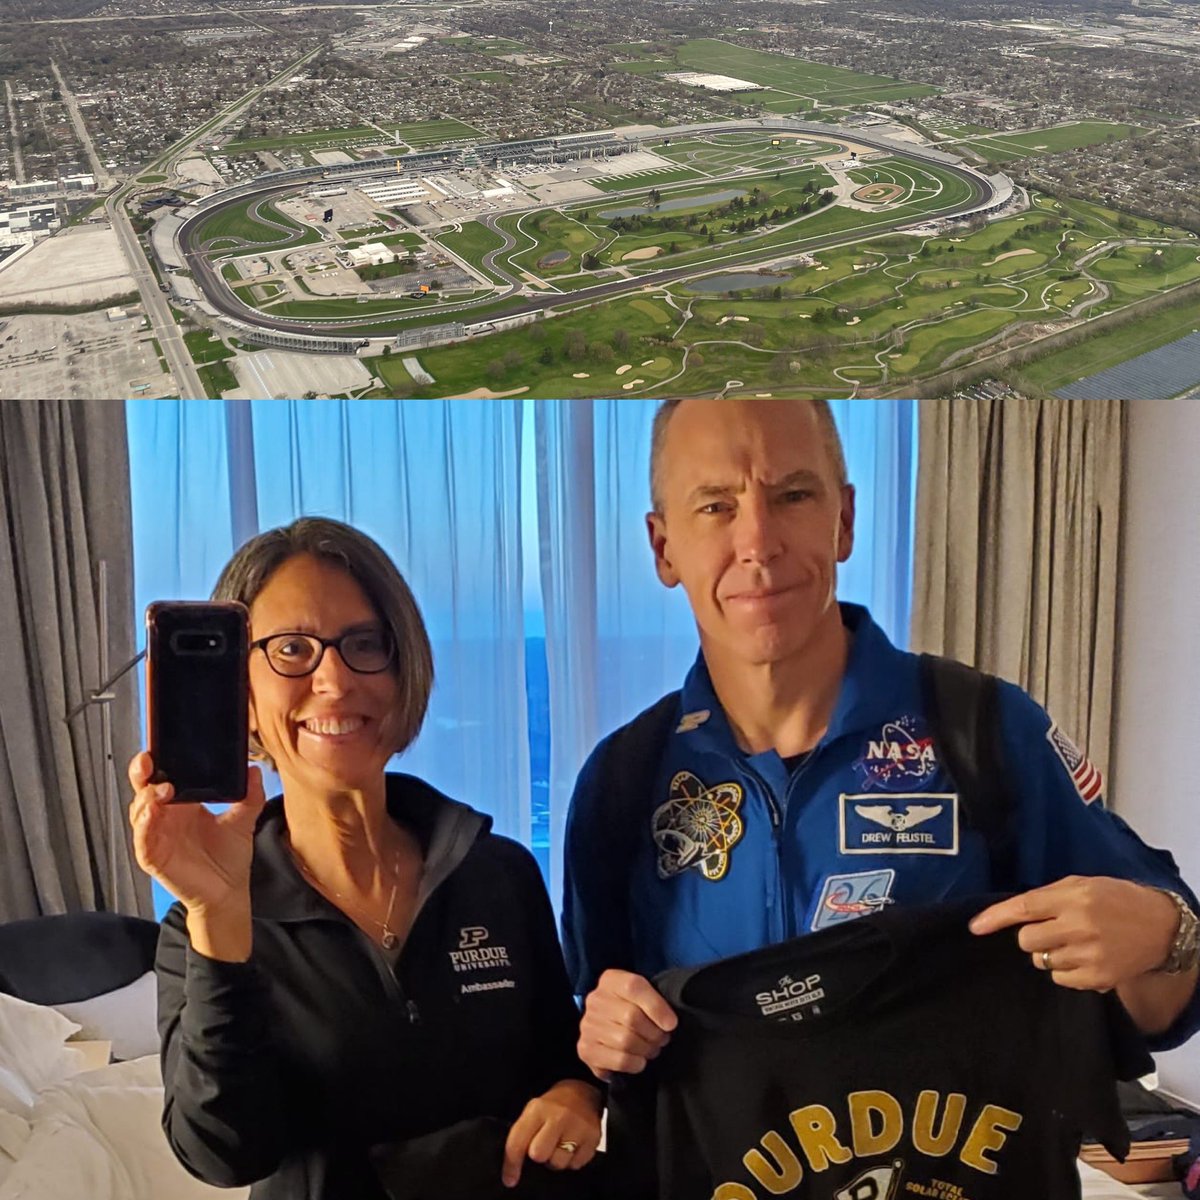 Where are you watching the #totalsolareclipse from? We are honoured to be here as #PurduePresidentialAmbassadors for @LifeAtPurdue @IMS. @NASA is here, too! Hope to see you! Exciting day for #Boilermakers. 1st the eclipse. Then @BoilerBal! #BoilerUp